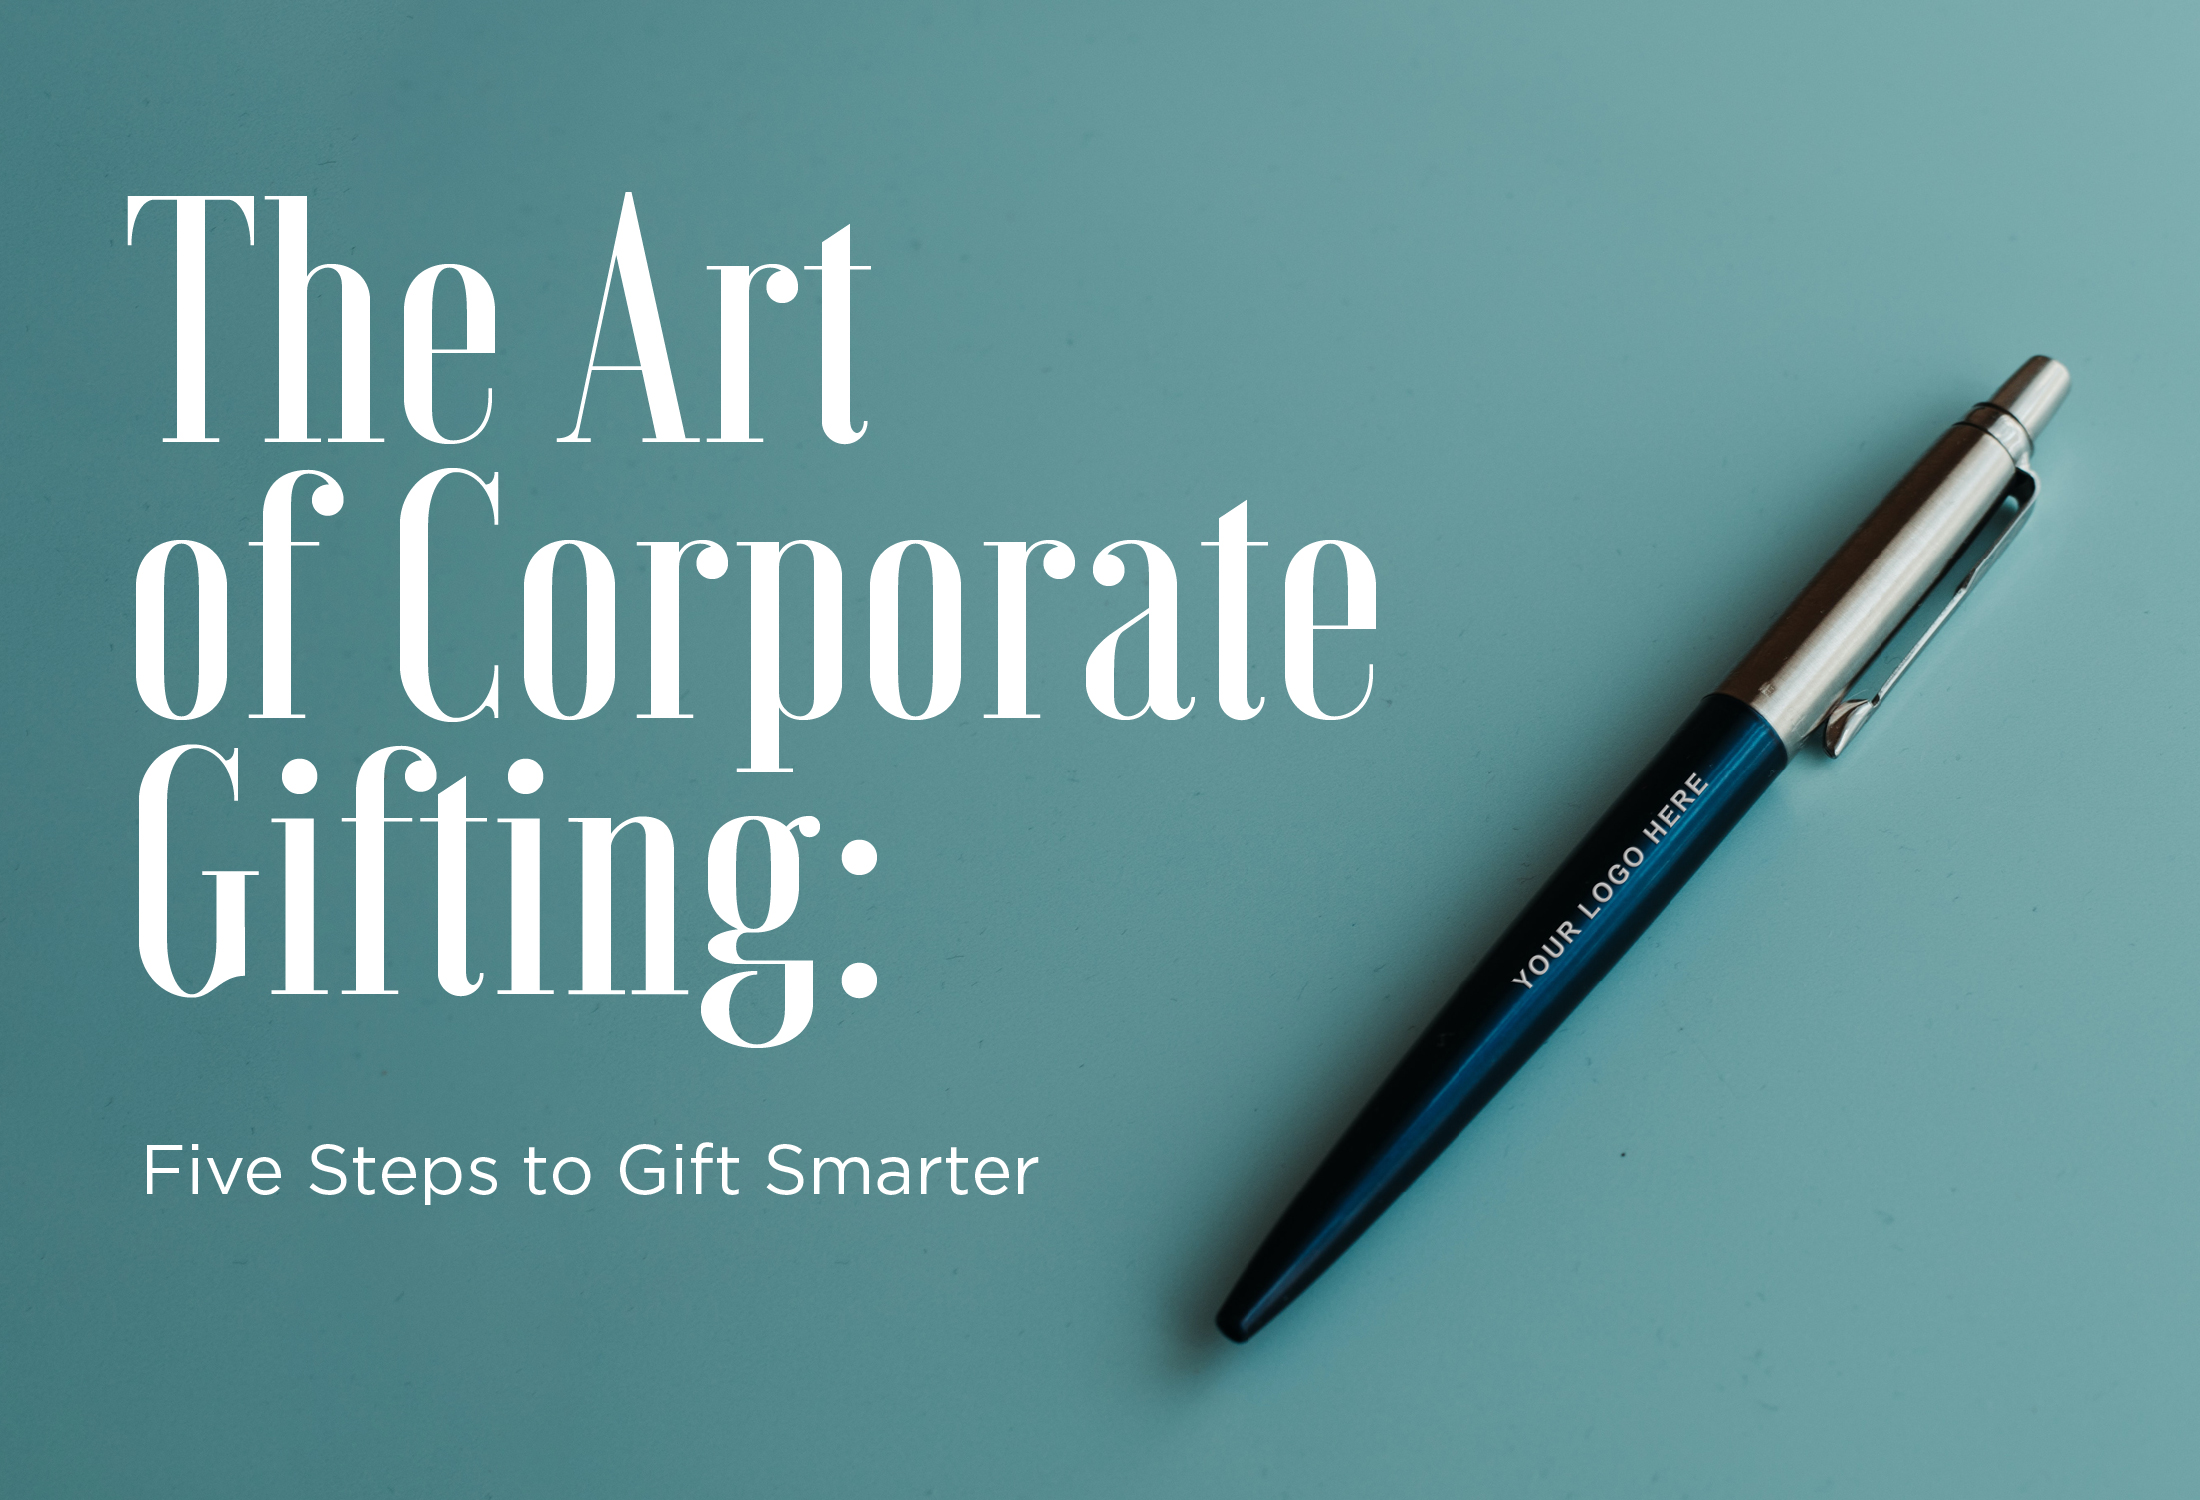 The Art of Corporate Gifting: Five Steps to Gift Smarter